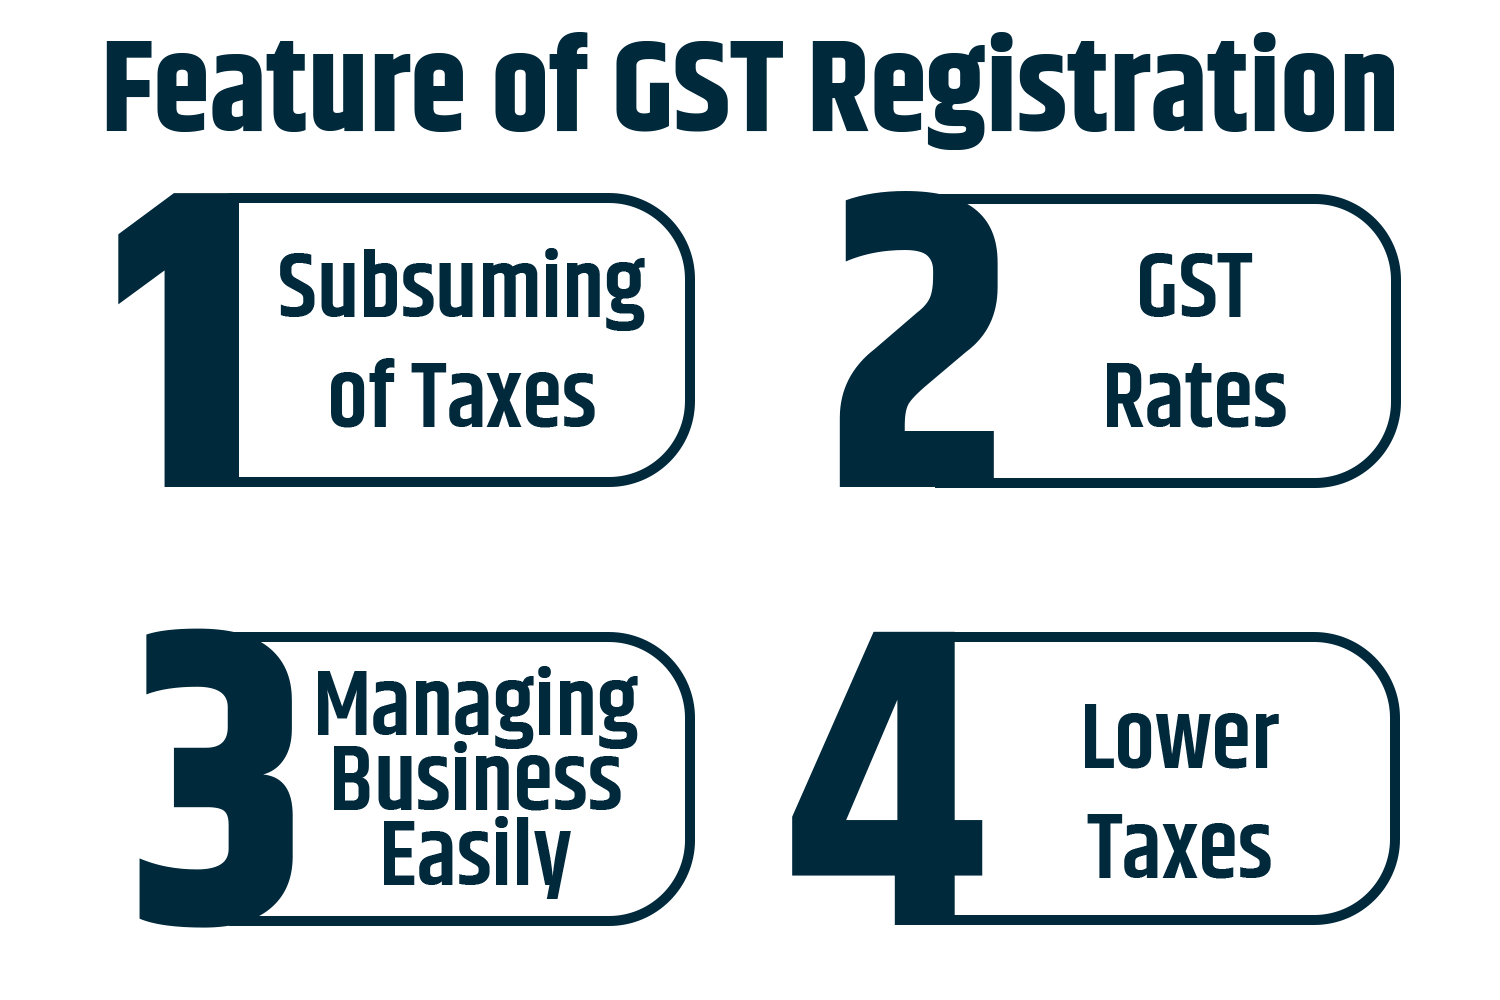 These are the Features of GST Registration